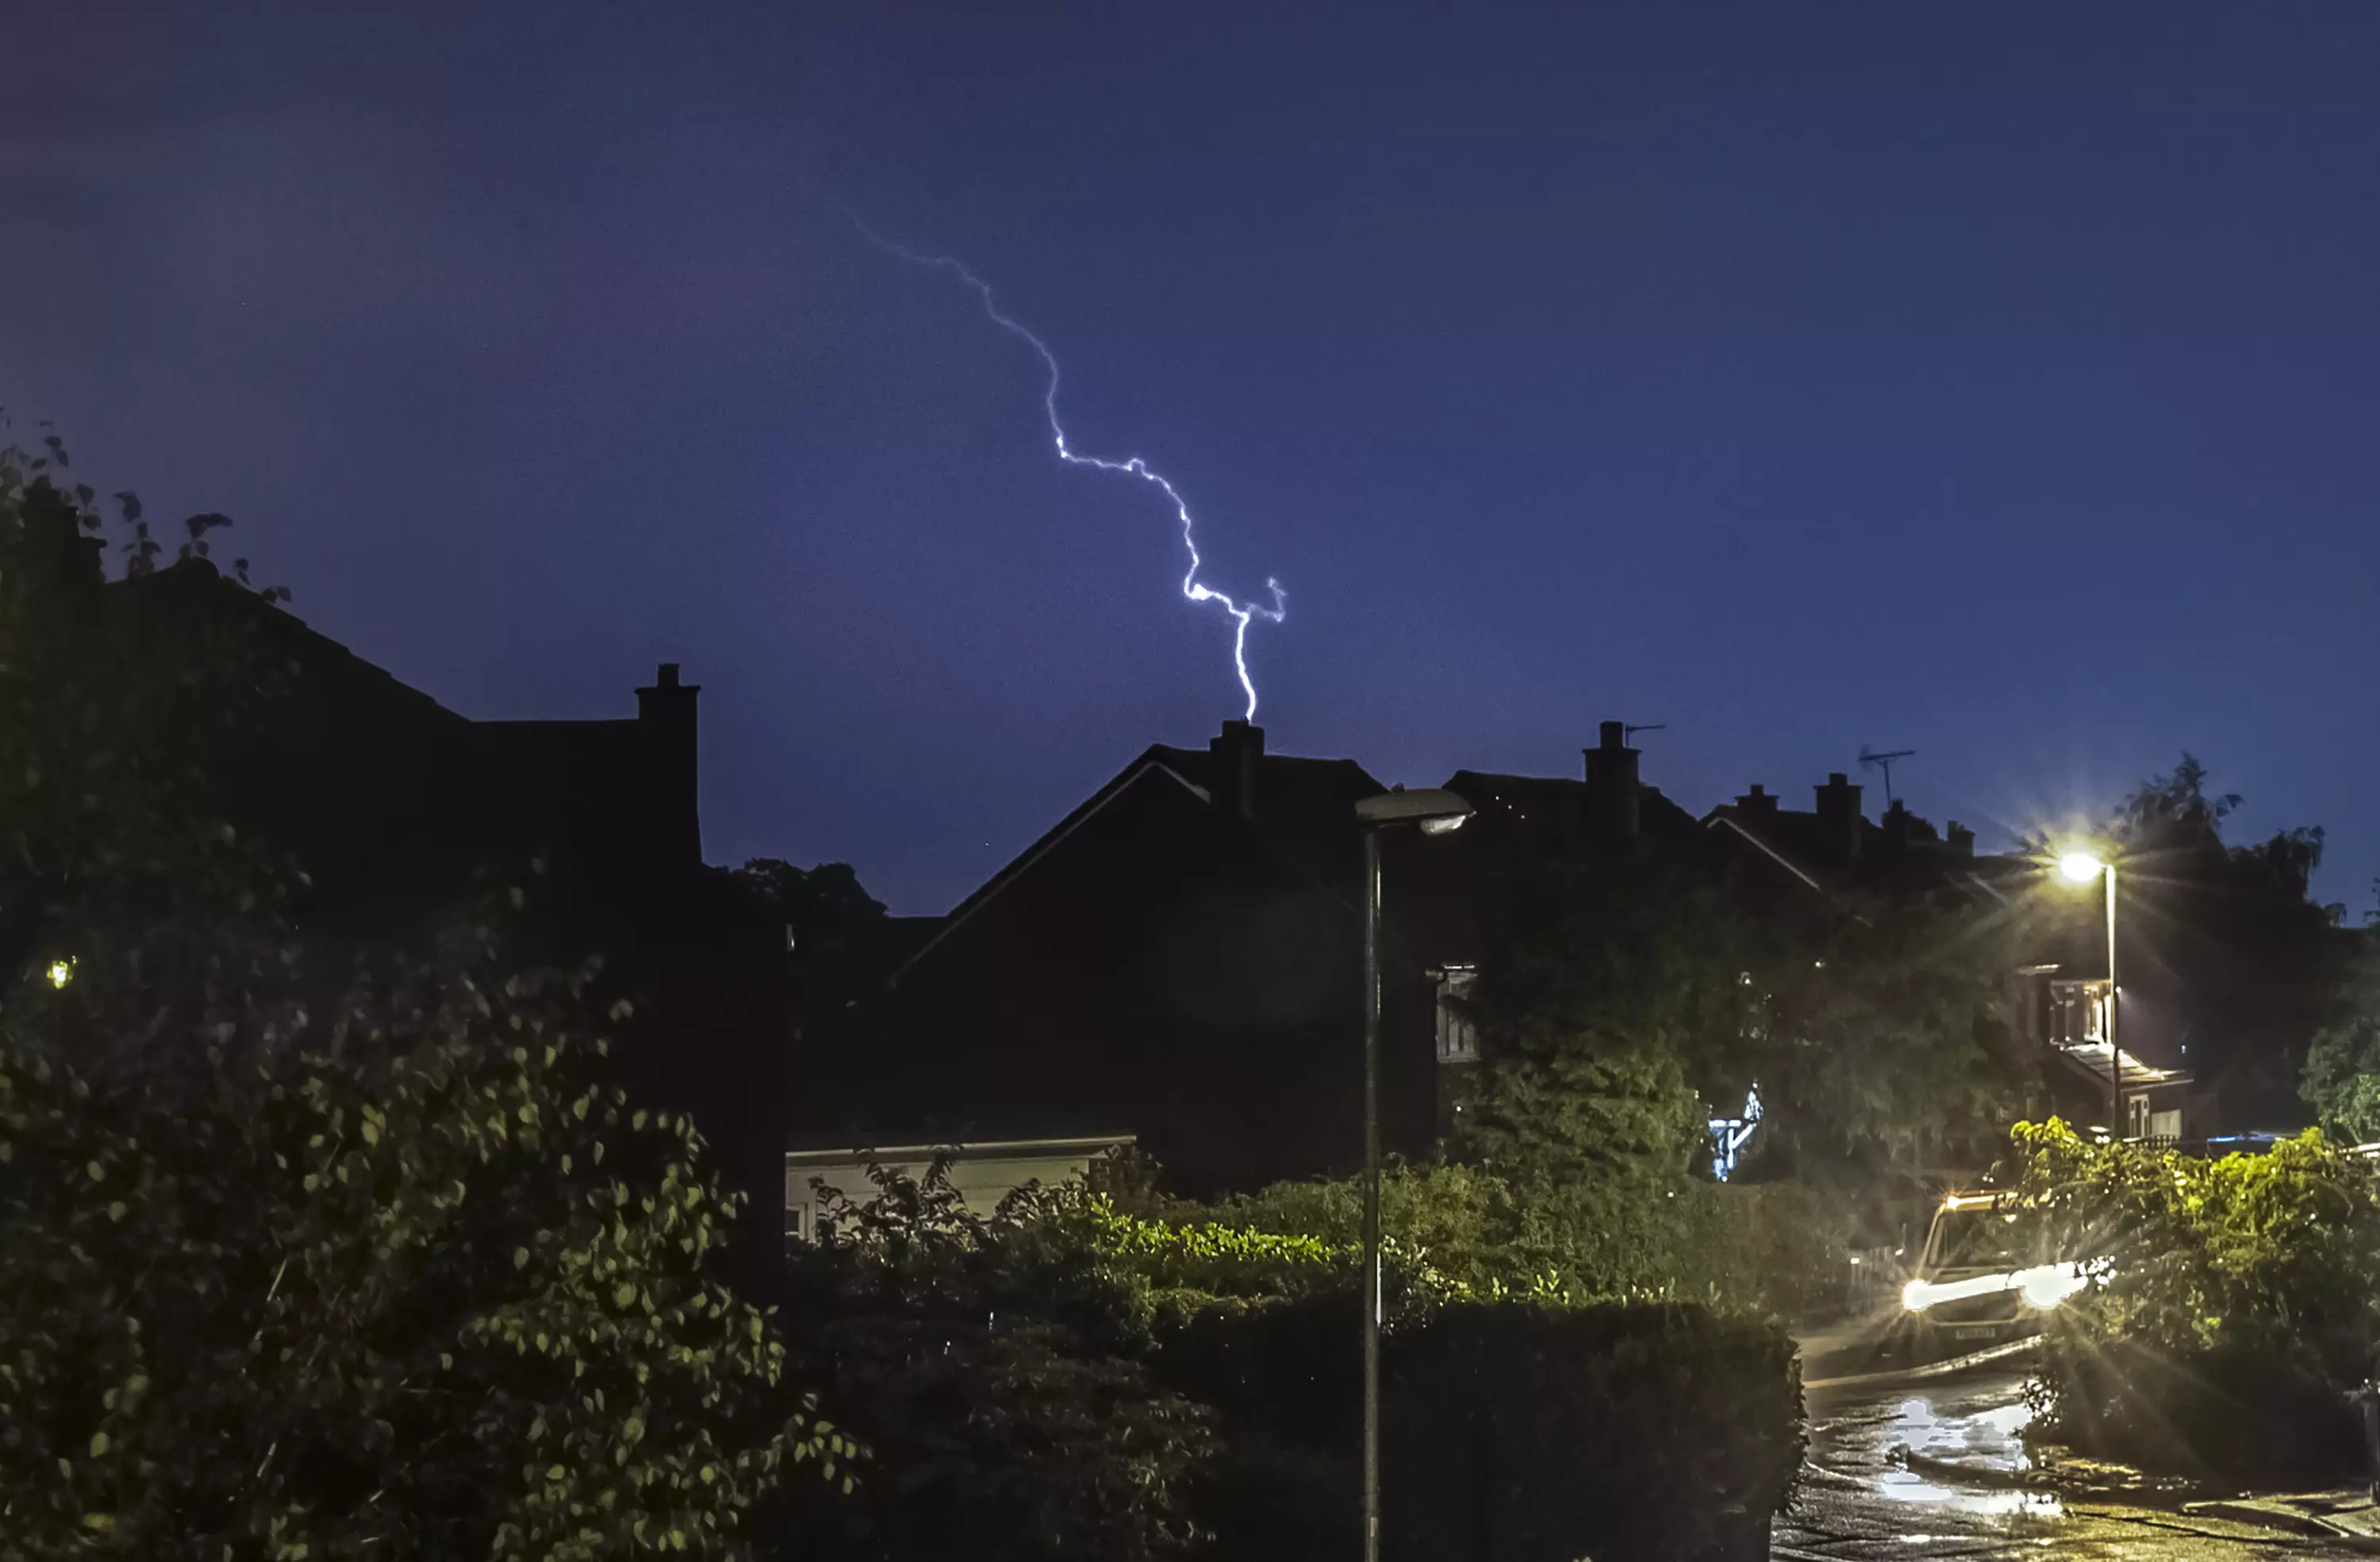 The Met Office has warned that we can expect heavy rain and thunderstorms as the bank holiday heatwave comes to an end.